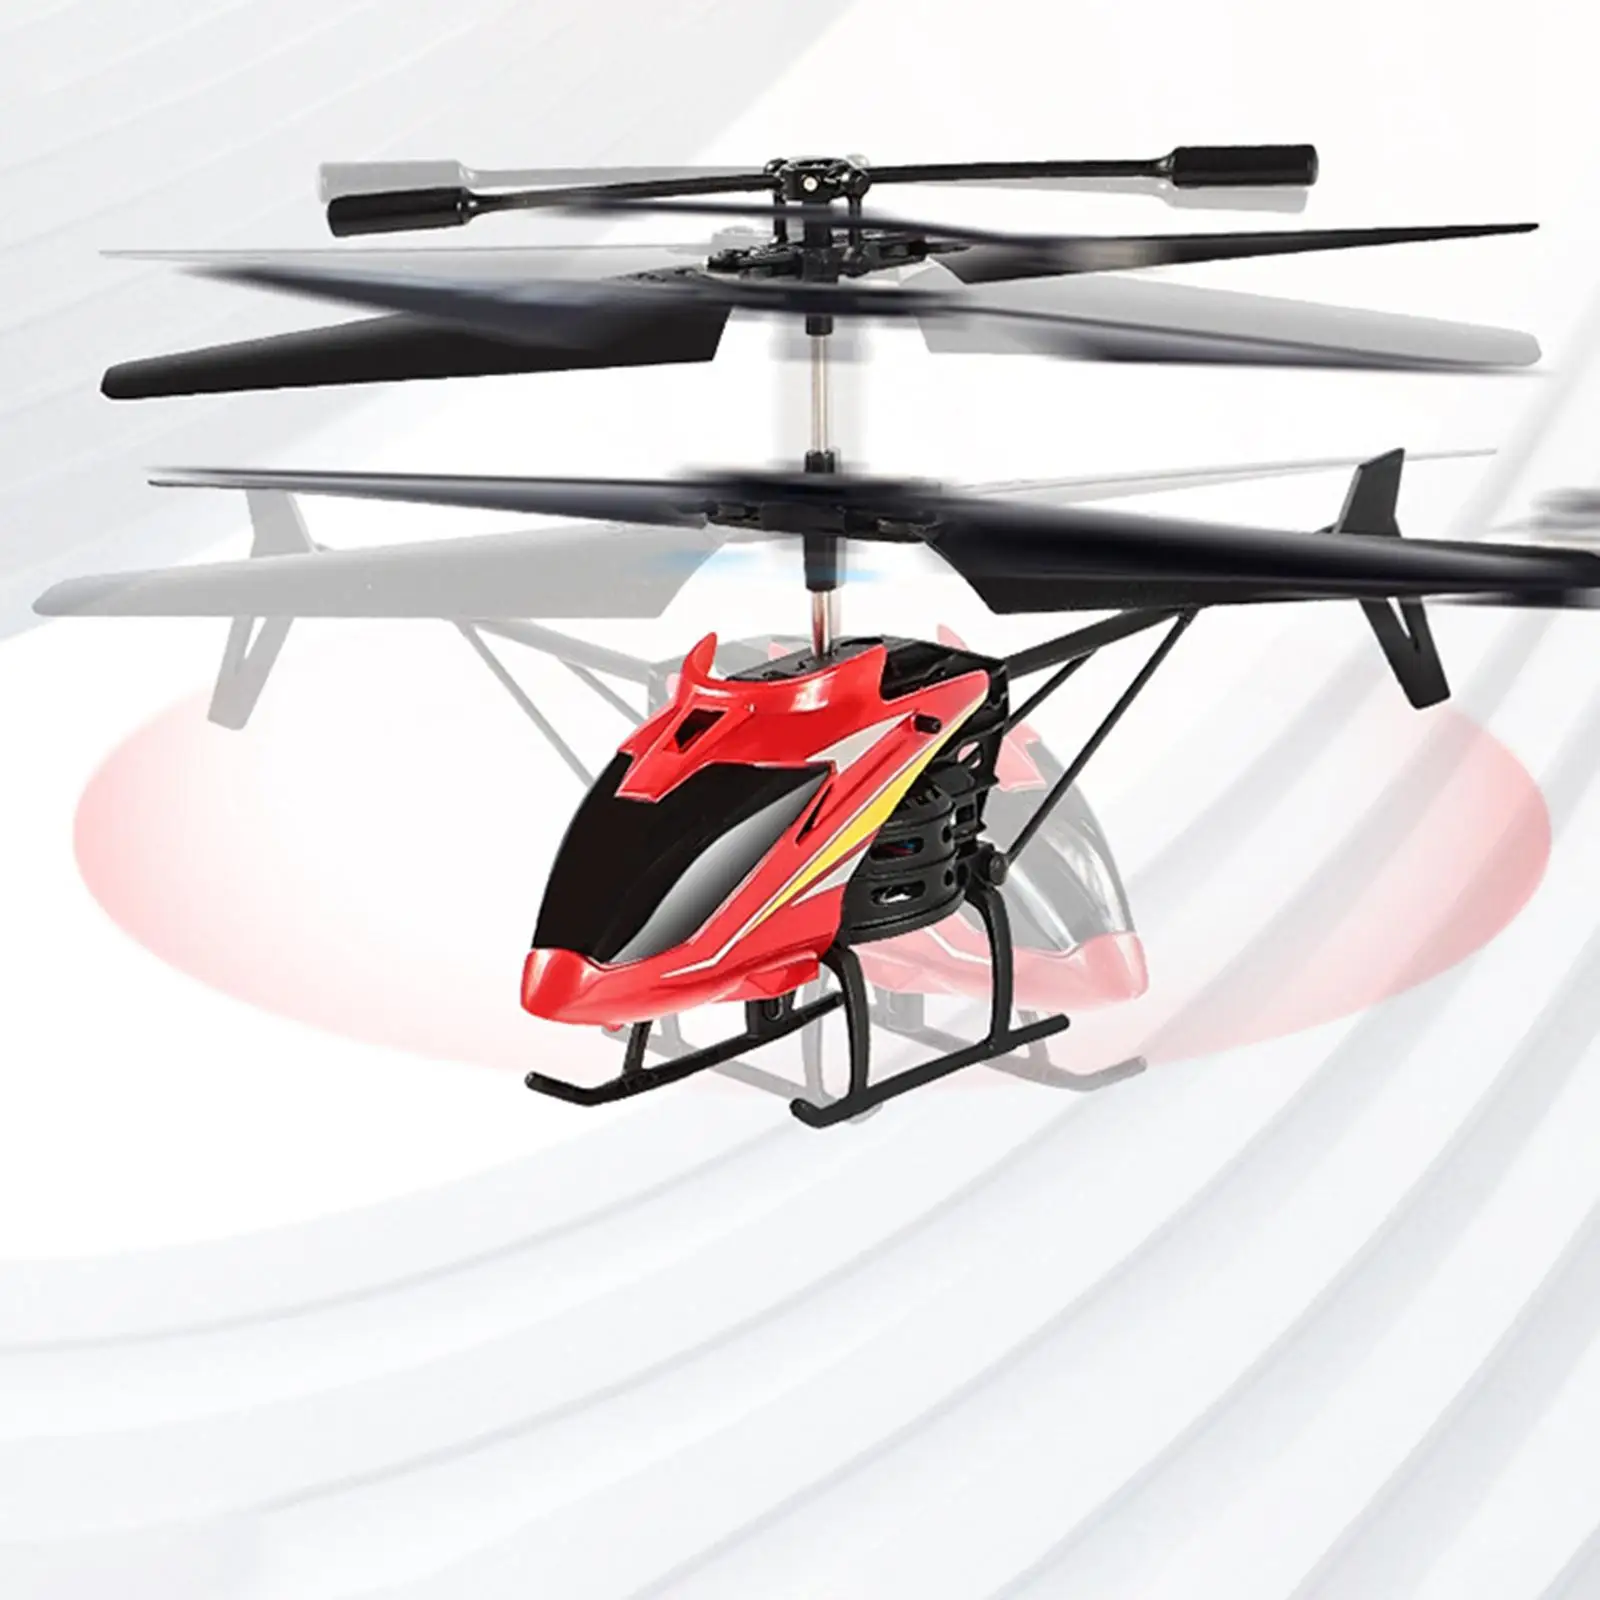 Remote Control Helicopter, with Altitude Hold,  /Landing,Gyro Stabilizer,LED Light for Indoor  for Kids and Beginners